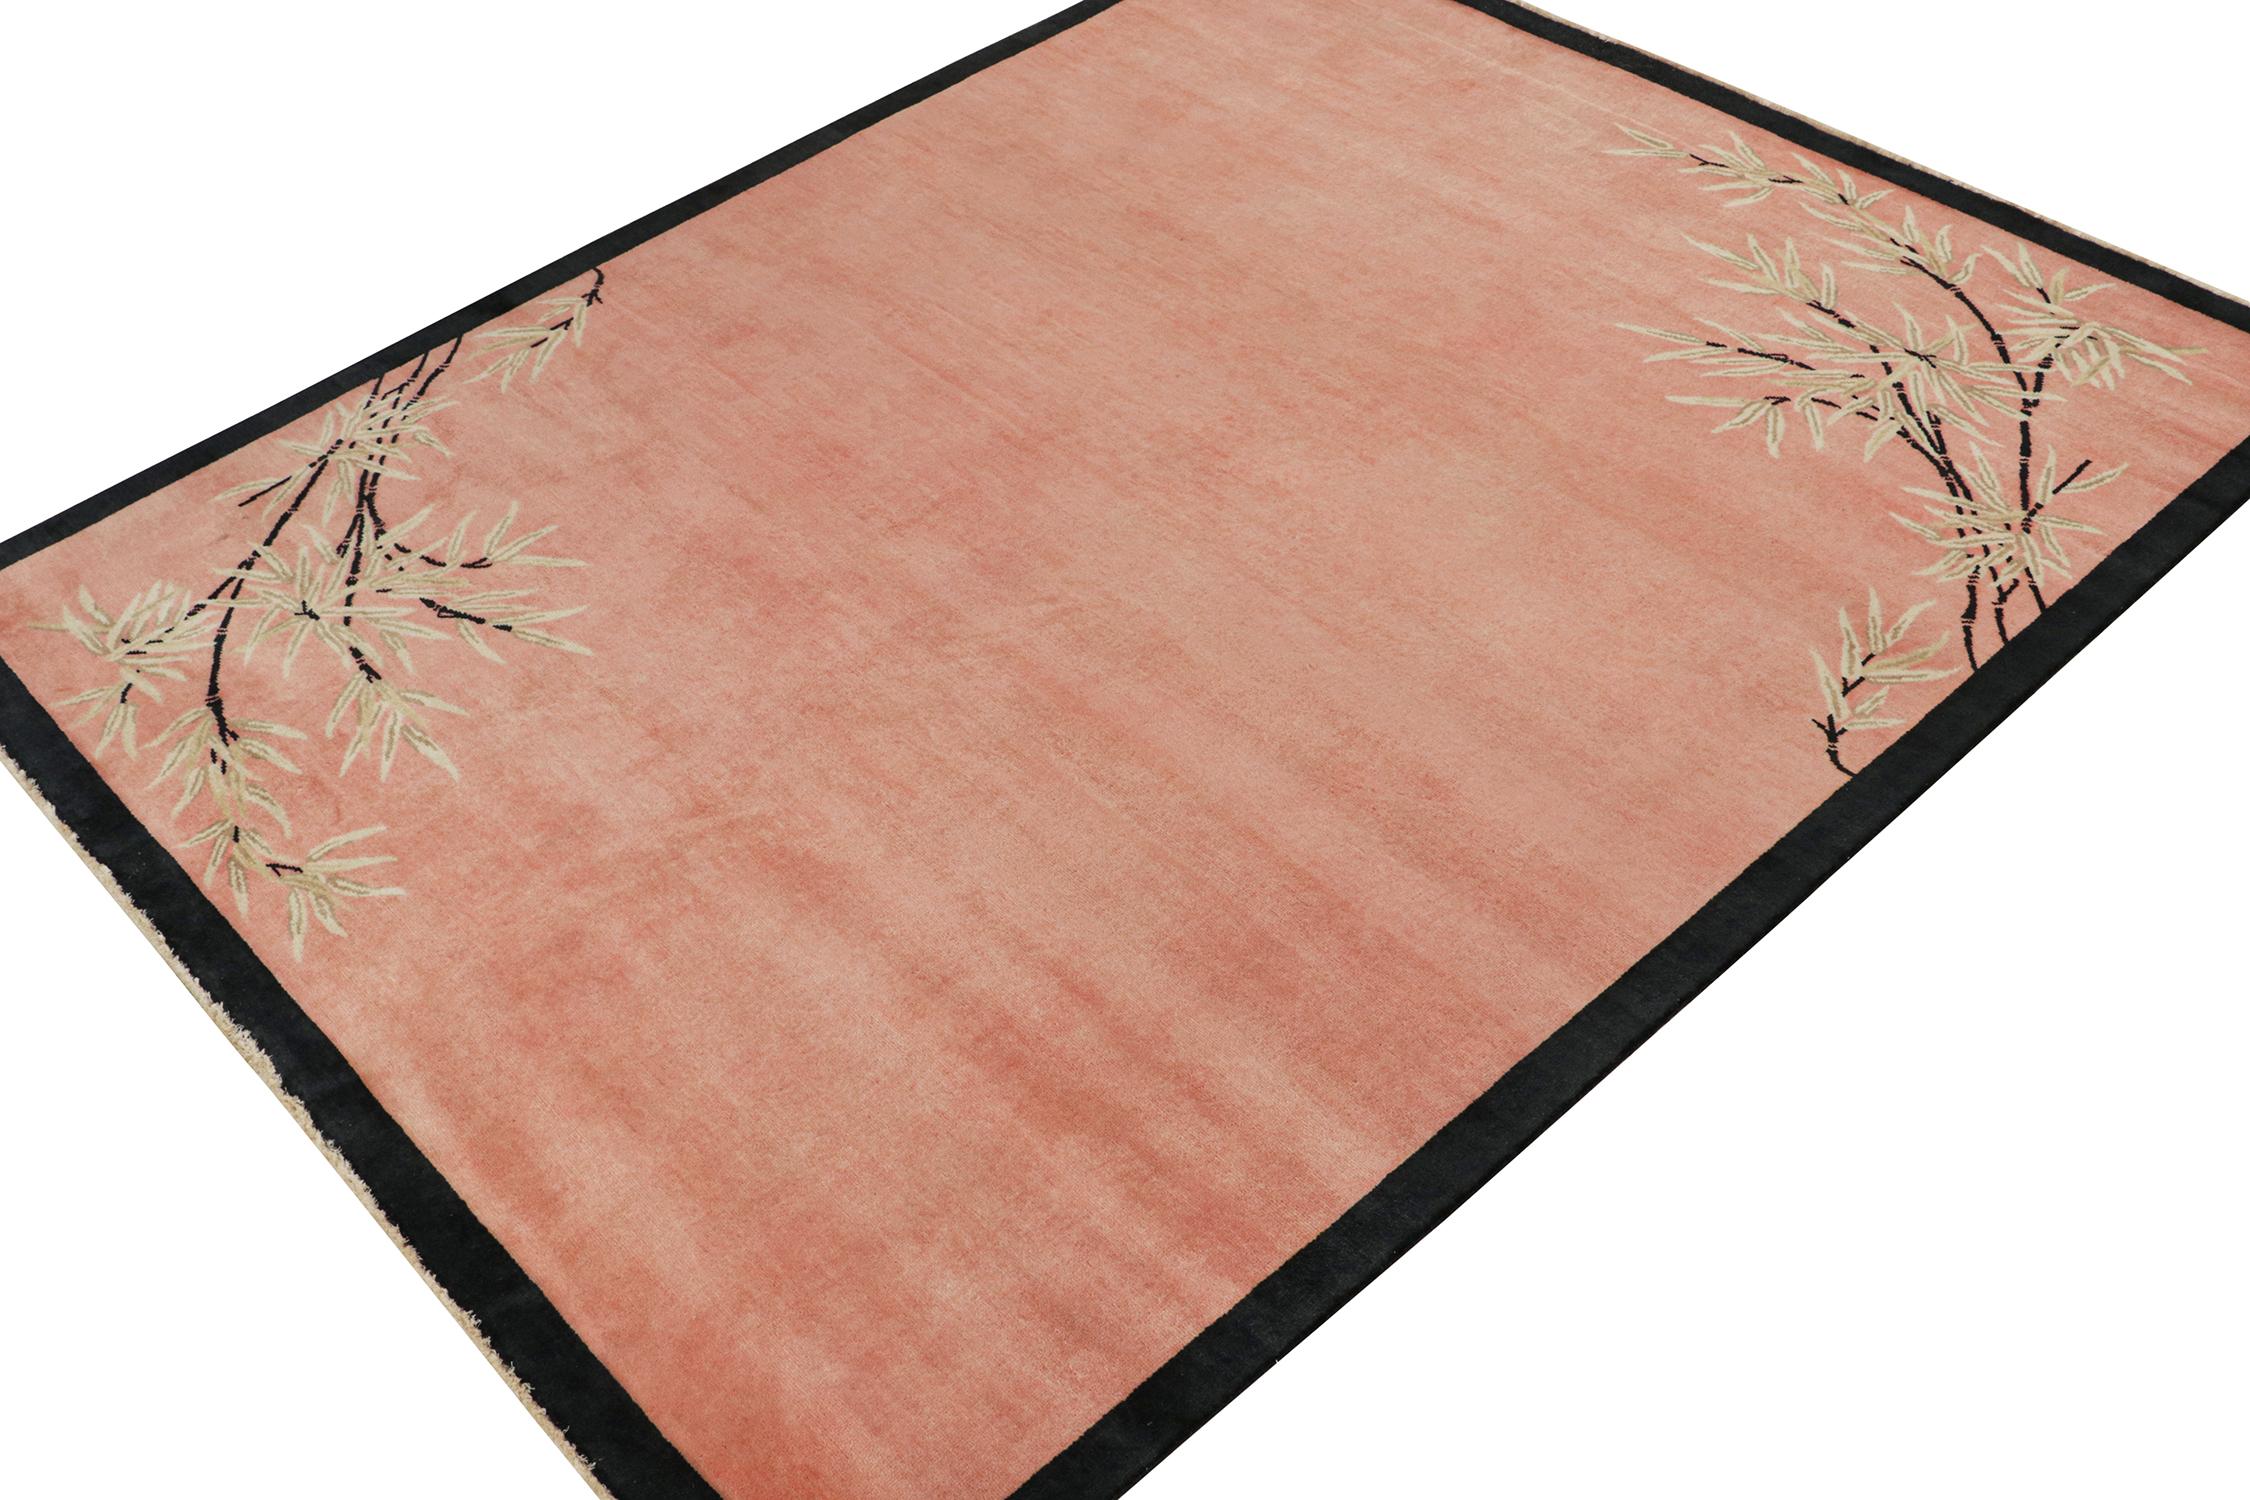 This 8x10 ode to Chinese Art Deco rugs is the next addition to Rug & Kilim's inspired new Deco Collection. 

Further On the Design:

The piece enjoys an emphasis on a warm pink background with finely detailed floral patterns within. Connoisseurs may